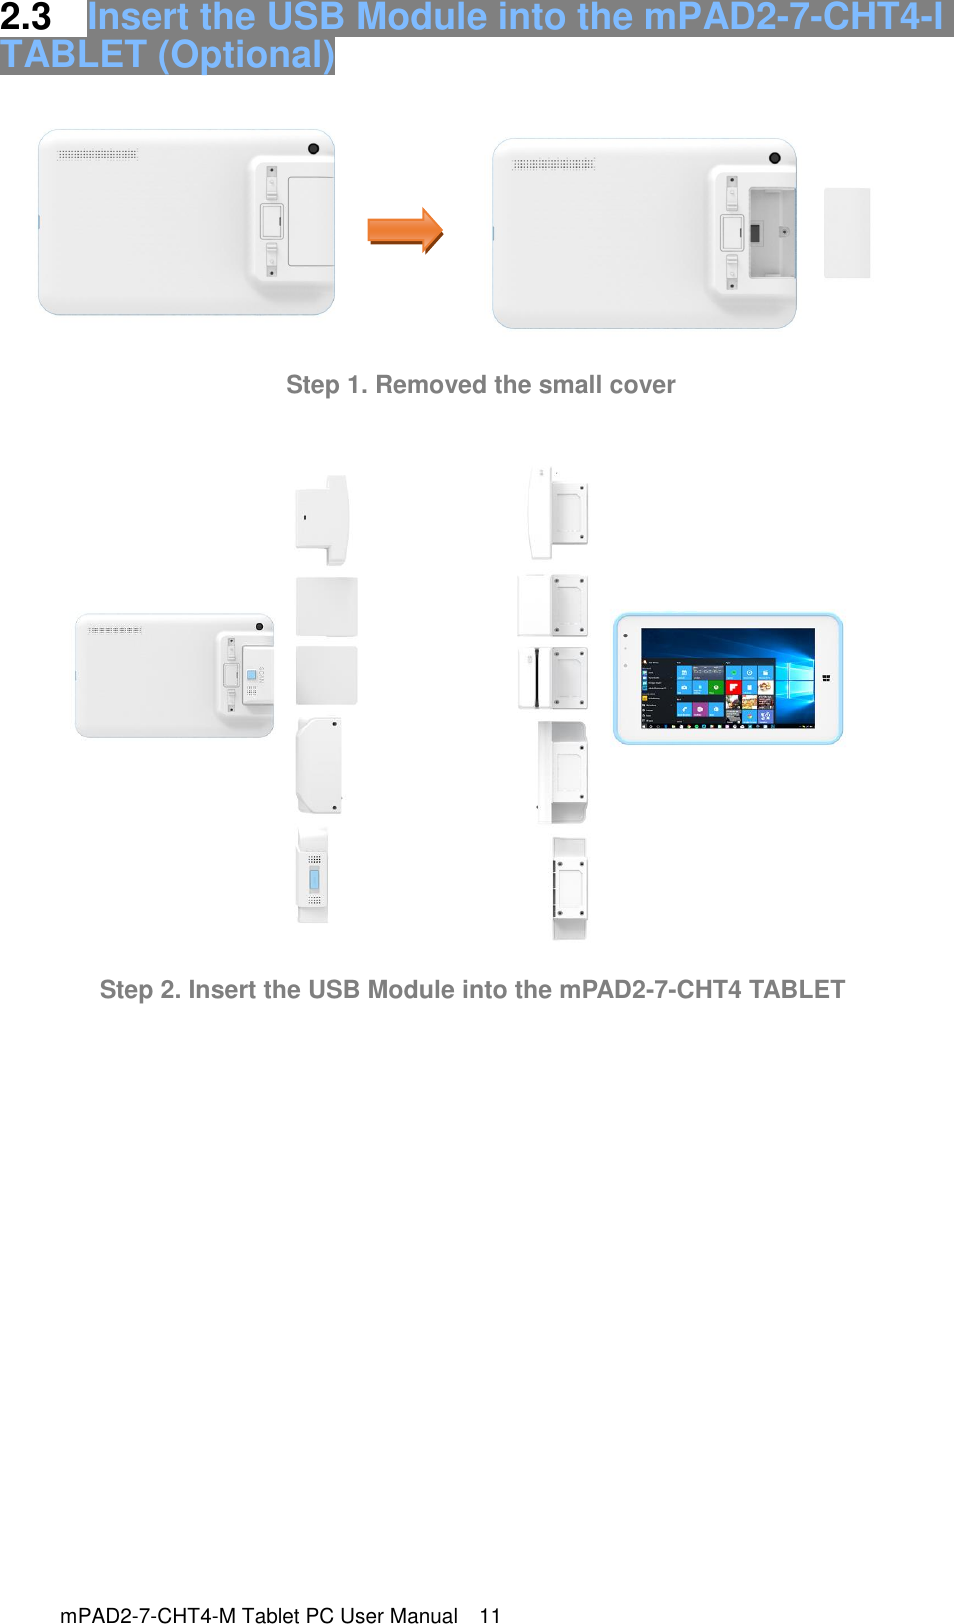  2.3  Insert the USB Module into the mPAD2-7-CHT4-I TABLET (Optional)                                     Step 1. Removed the small cover       Step 2. Insert the USB Module into the mPAD2-7-CHT4 TABLET                        mPAD2-7-CHT4-M Tablet PC User Manual  11   PC User Manual  10 